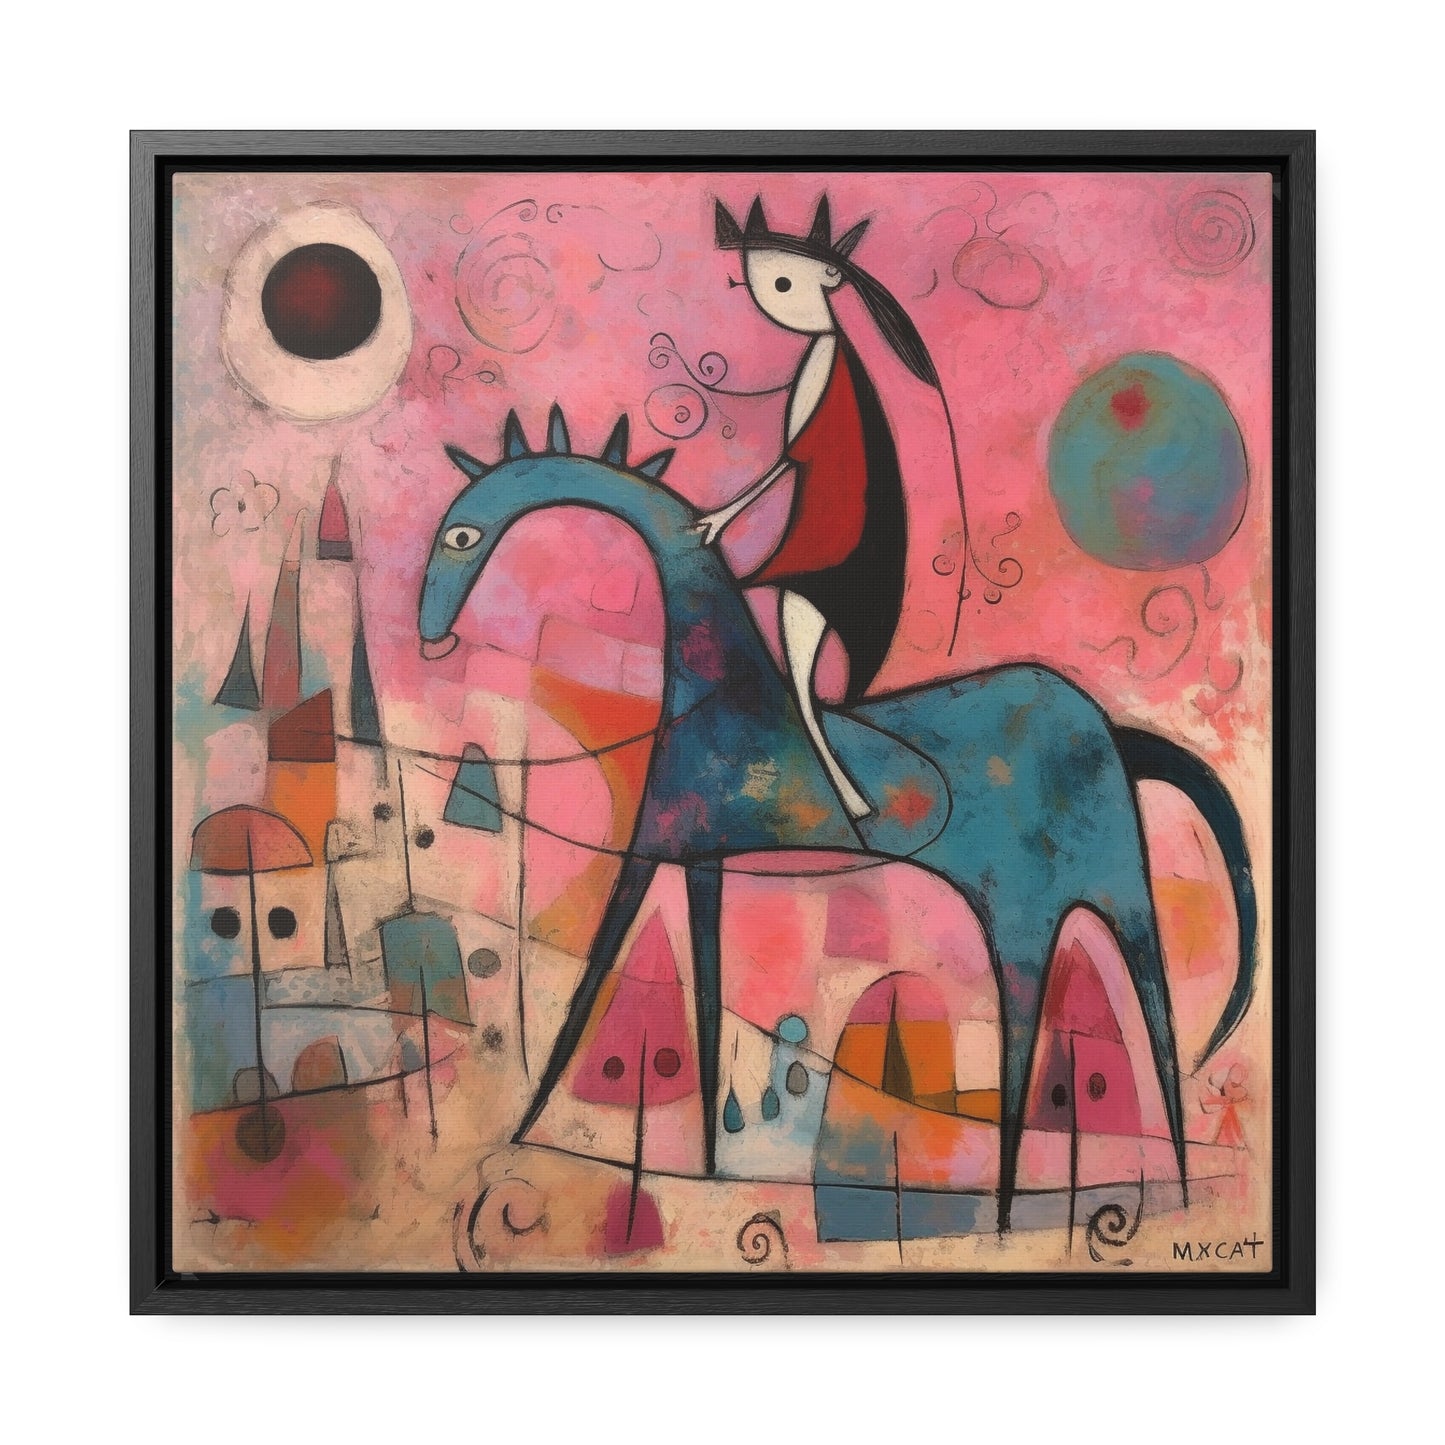 The Dreams of the Child 42, Gallery Canvas Wraps, Square Frame